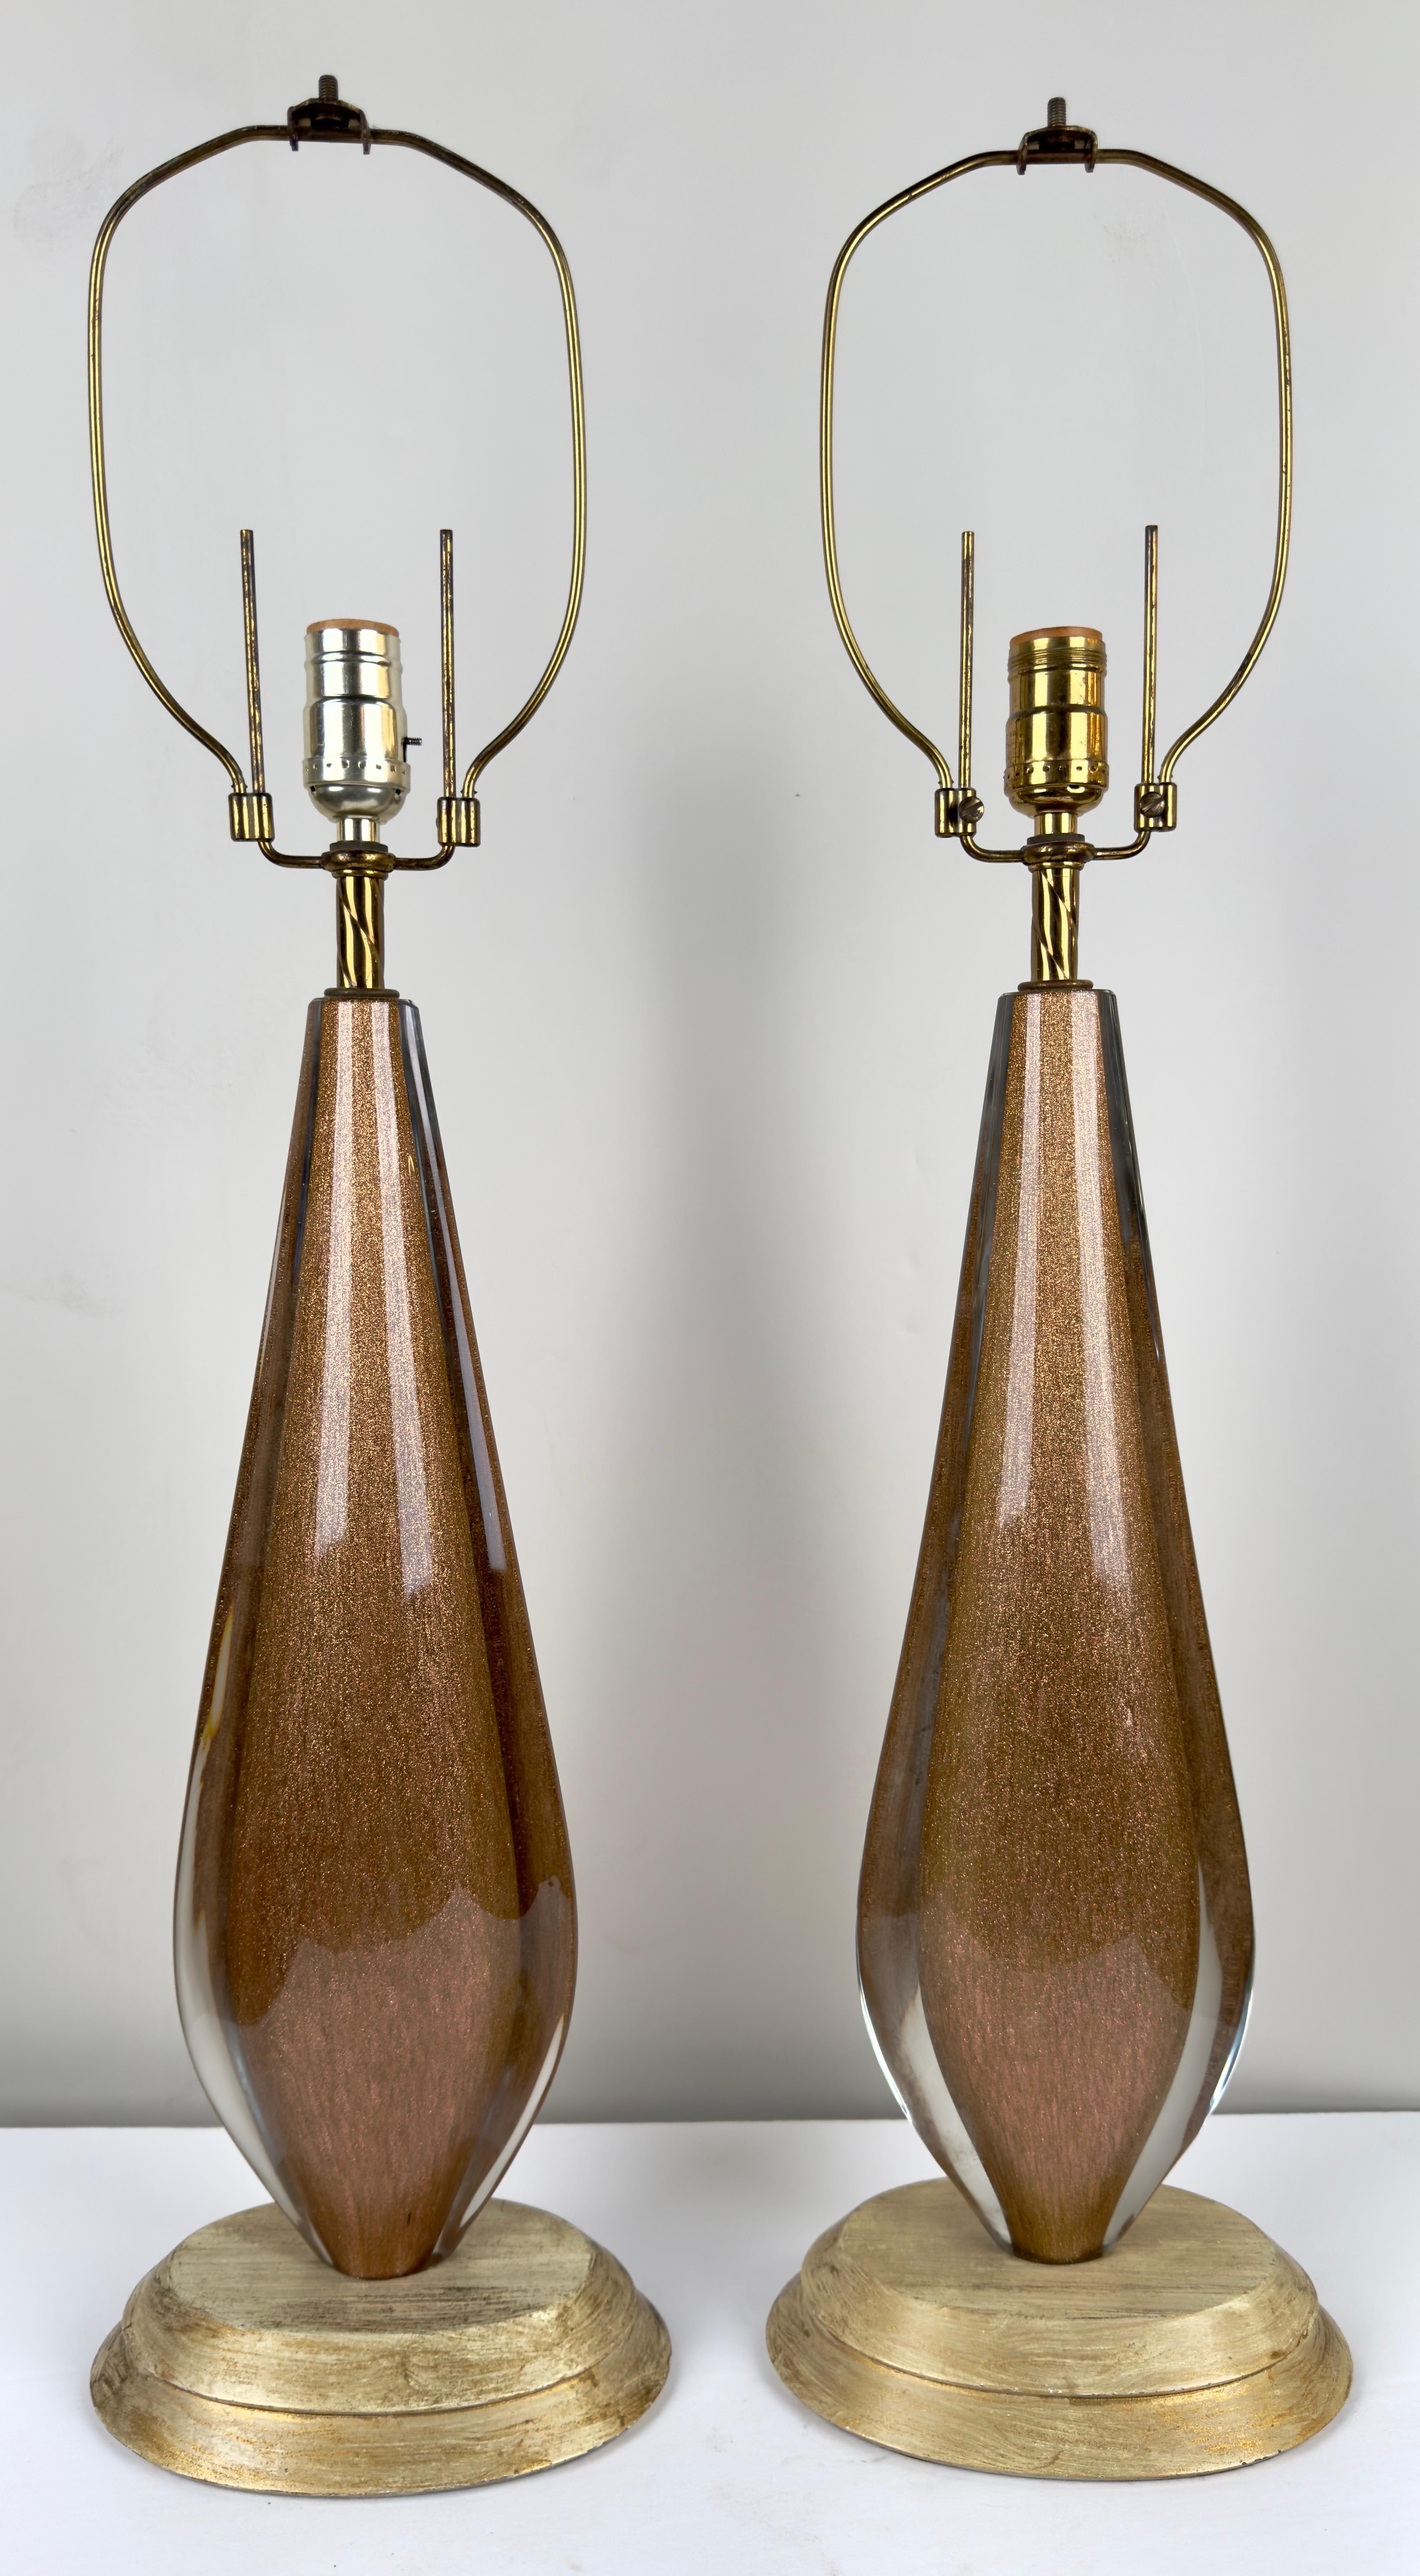  A mesmerizing pair of Mid Century Modern table lamps. Crafted from art glass adorned with golden grains that visually seem to dance within the glass, these lamps exude a sense of timeless elegance and allure.

The curvaceous bodies of the lamps,